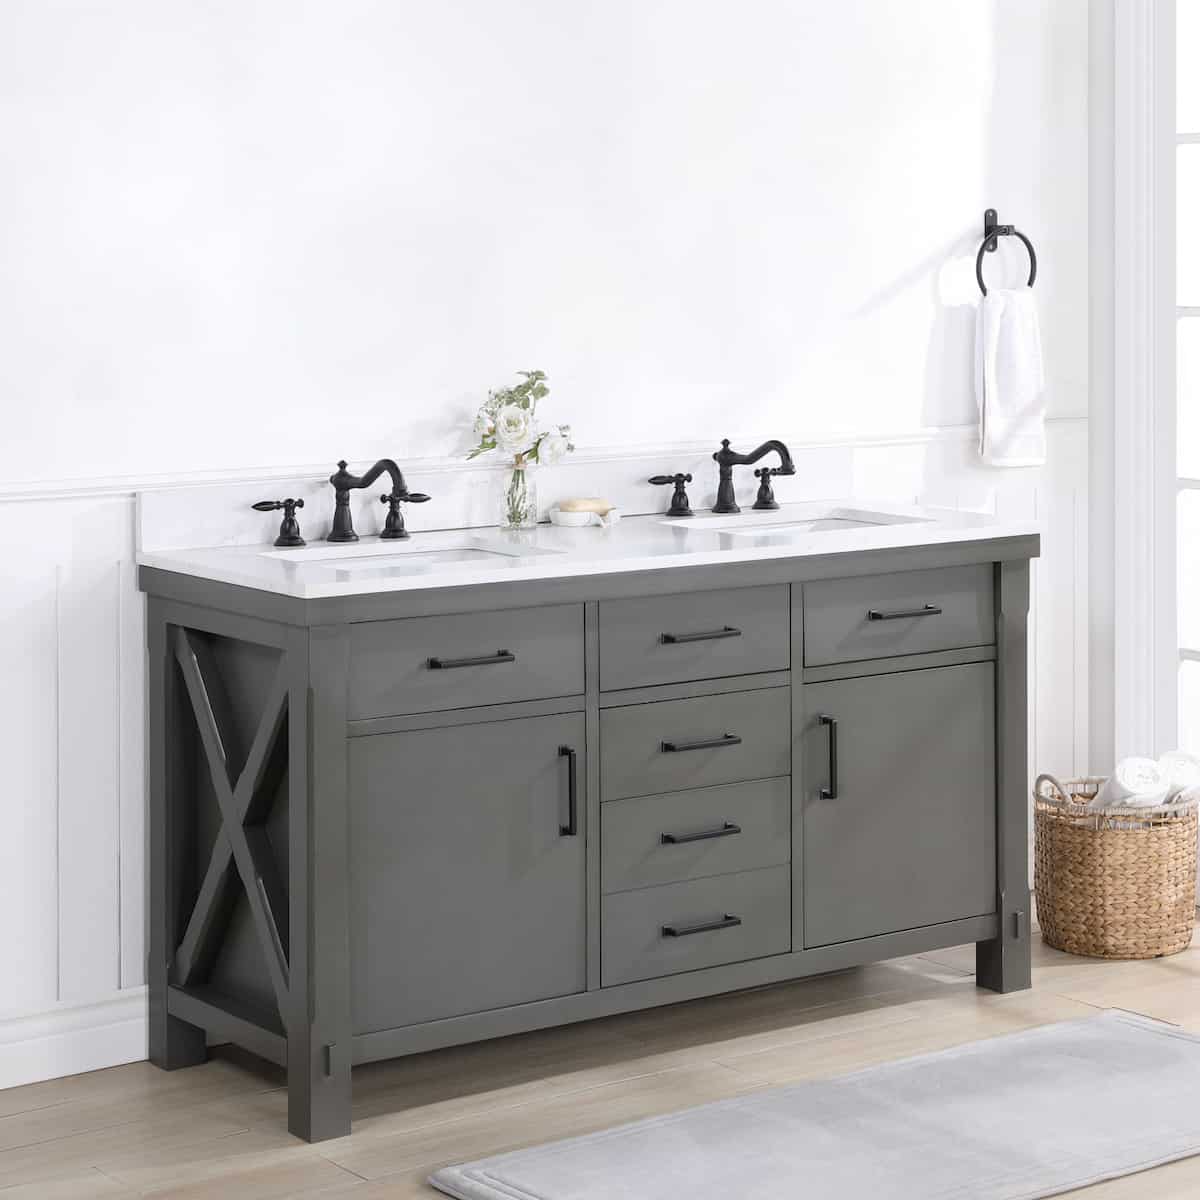 Vinnova Viella 60 Inch Double Sink Bath Vanity in Rust Grey Finish with White Composite Countertop Without Mirror Side 701860-RU-WS-NM